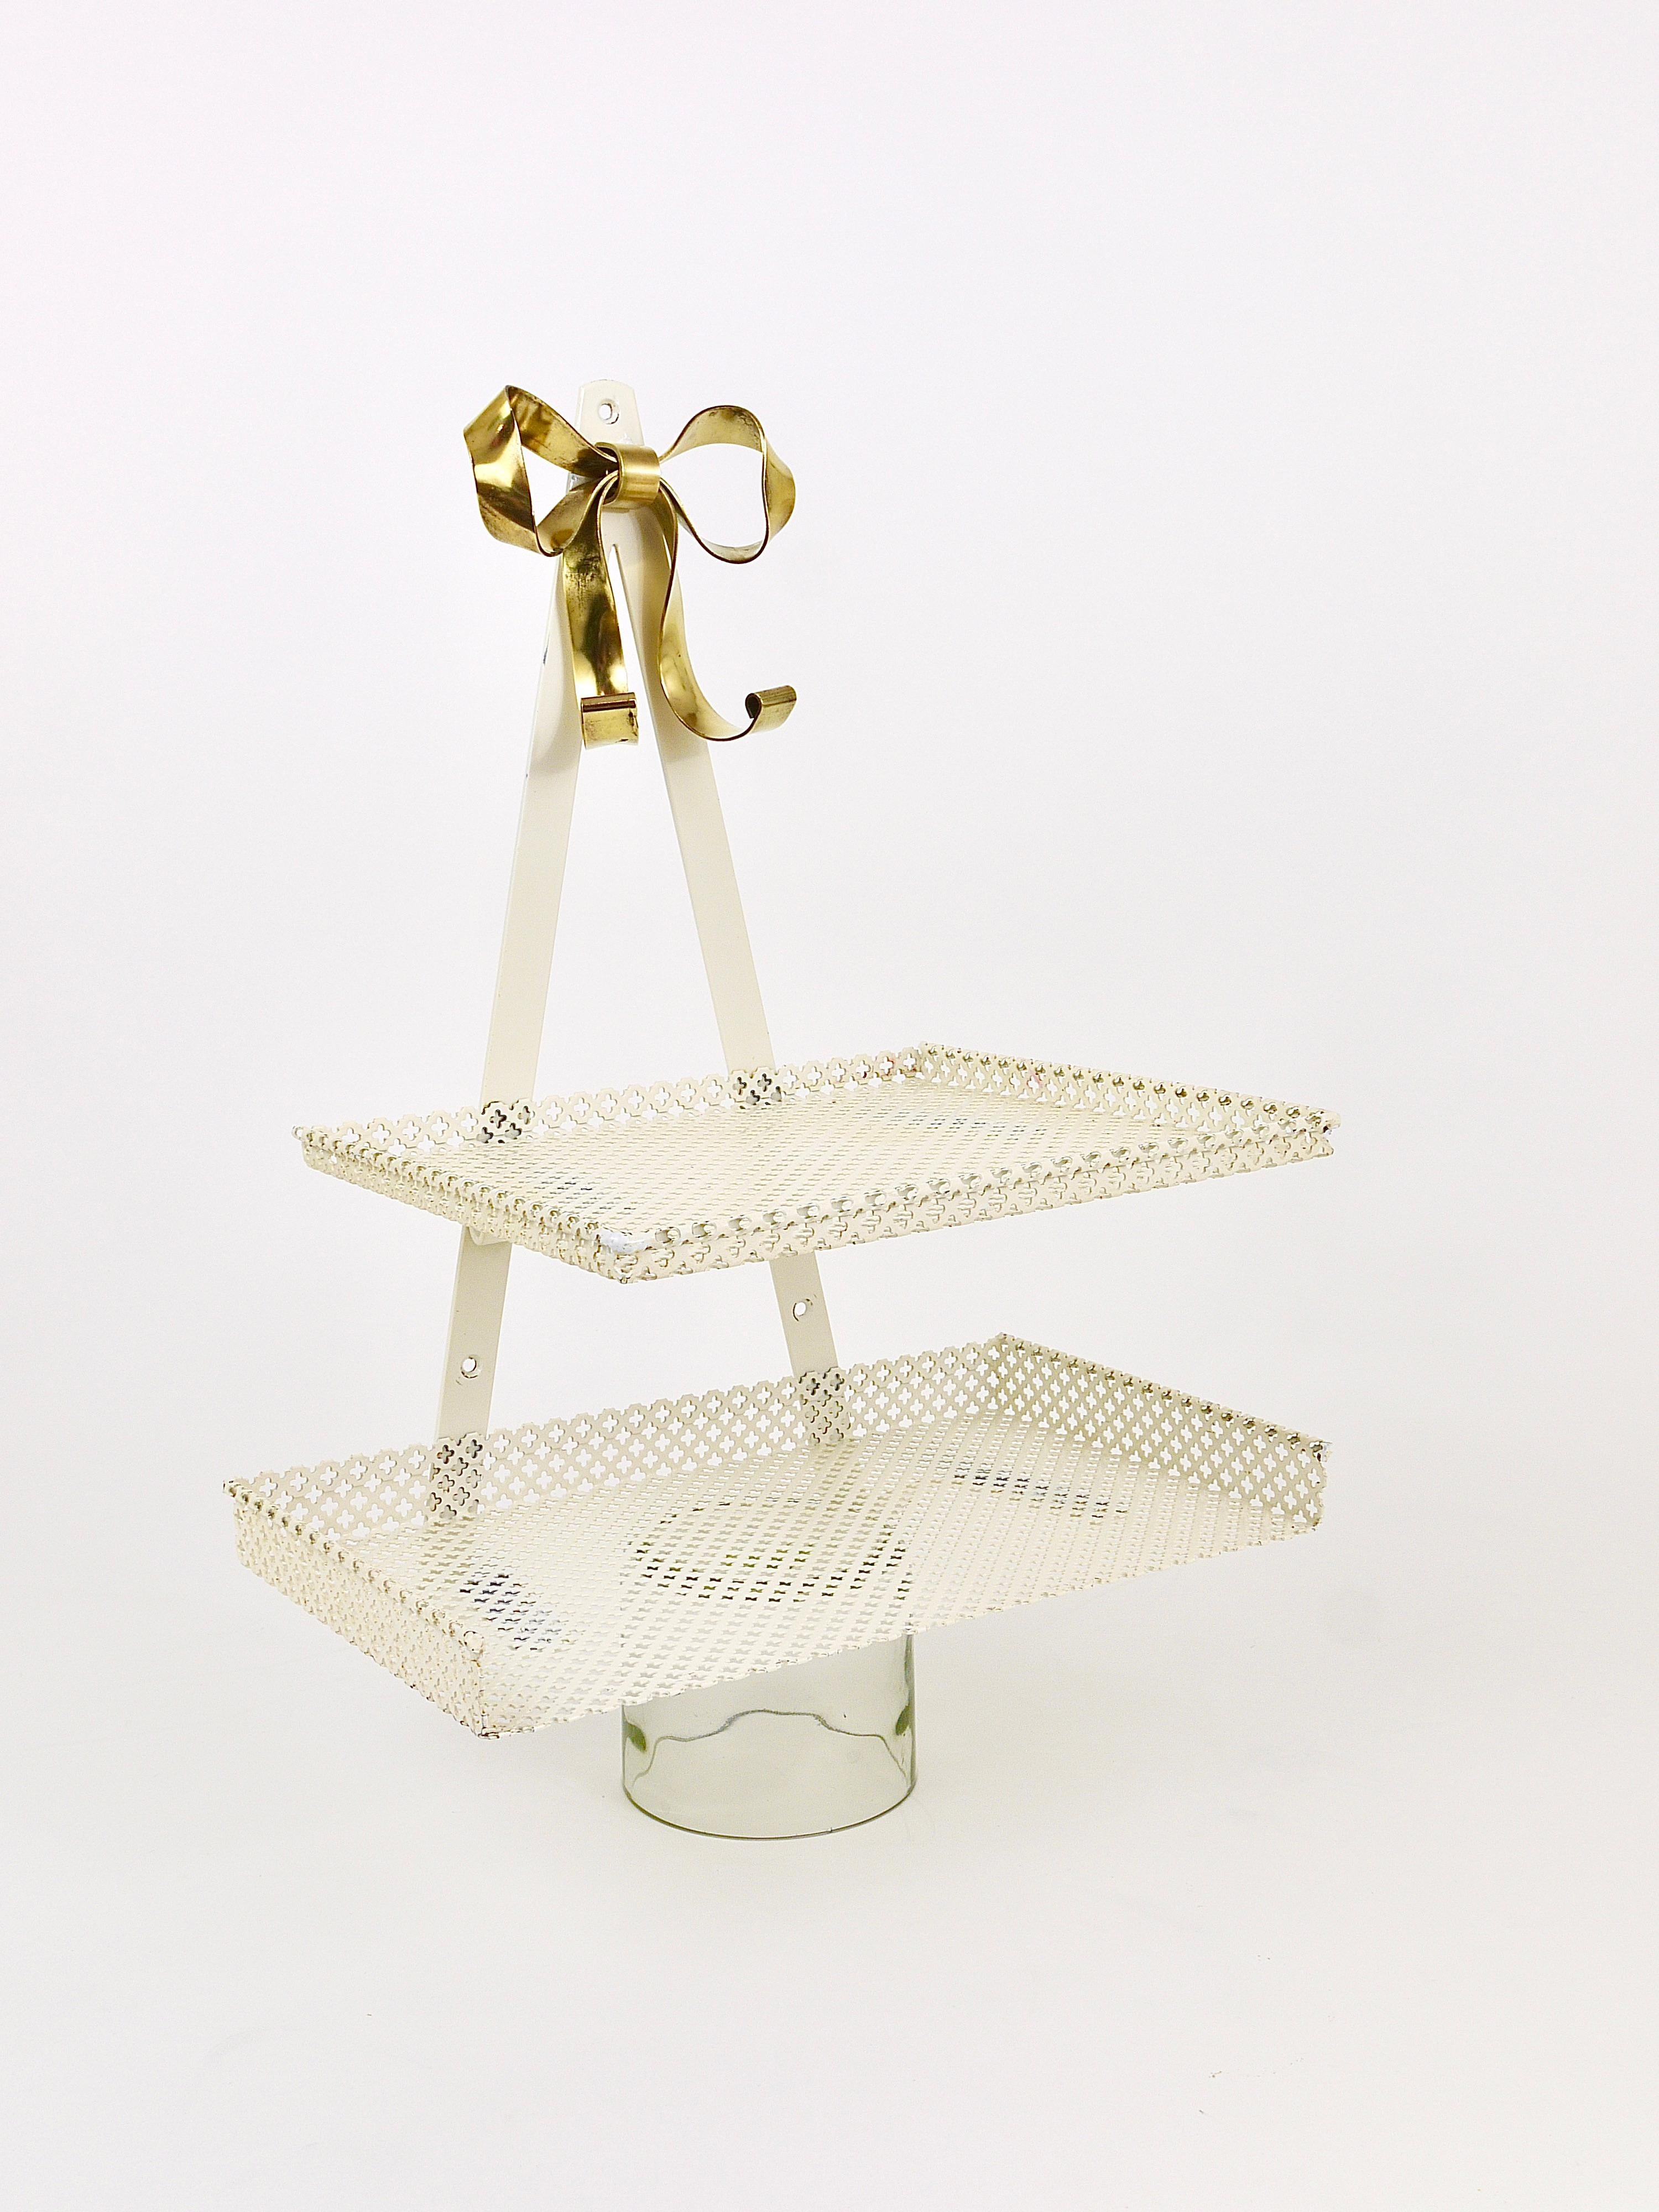 A beautiful wall-mounted midcentury rack with two shelves and a lovely brass ribbon on its top. Manufactured in the 1950s by Vereinigte Werkstätten München / Munich / Münchner Werkstätten, Germany. Made of white lacquered perforated metal and